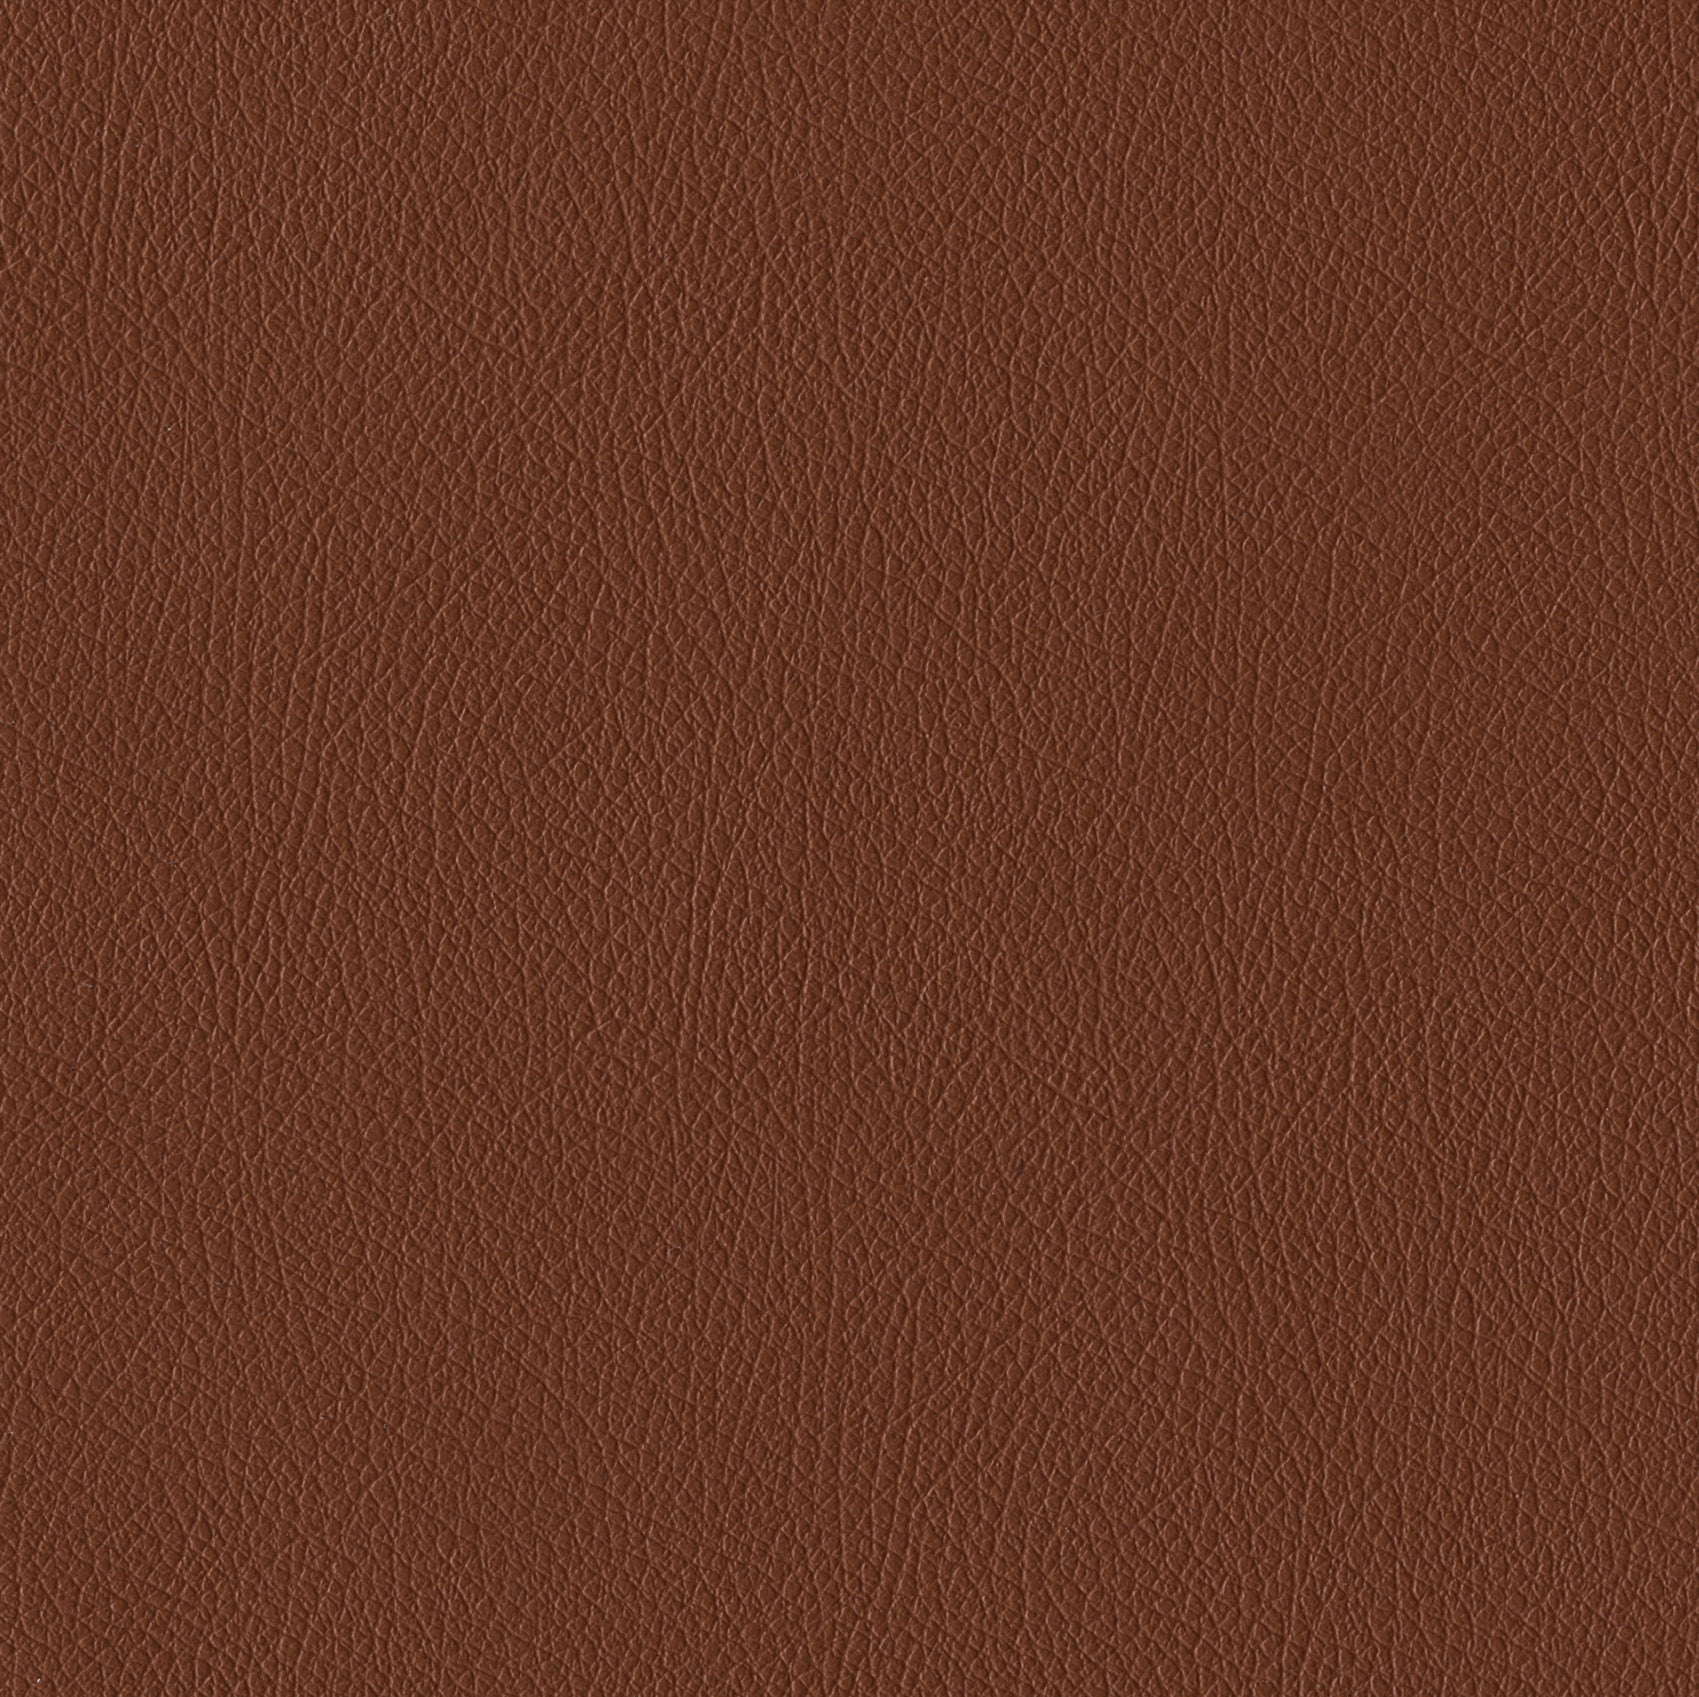    Andriali-Contract-Vinyl_Upholstery-Design-IconFR-Color-323Chestnut-Width-140cm